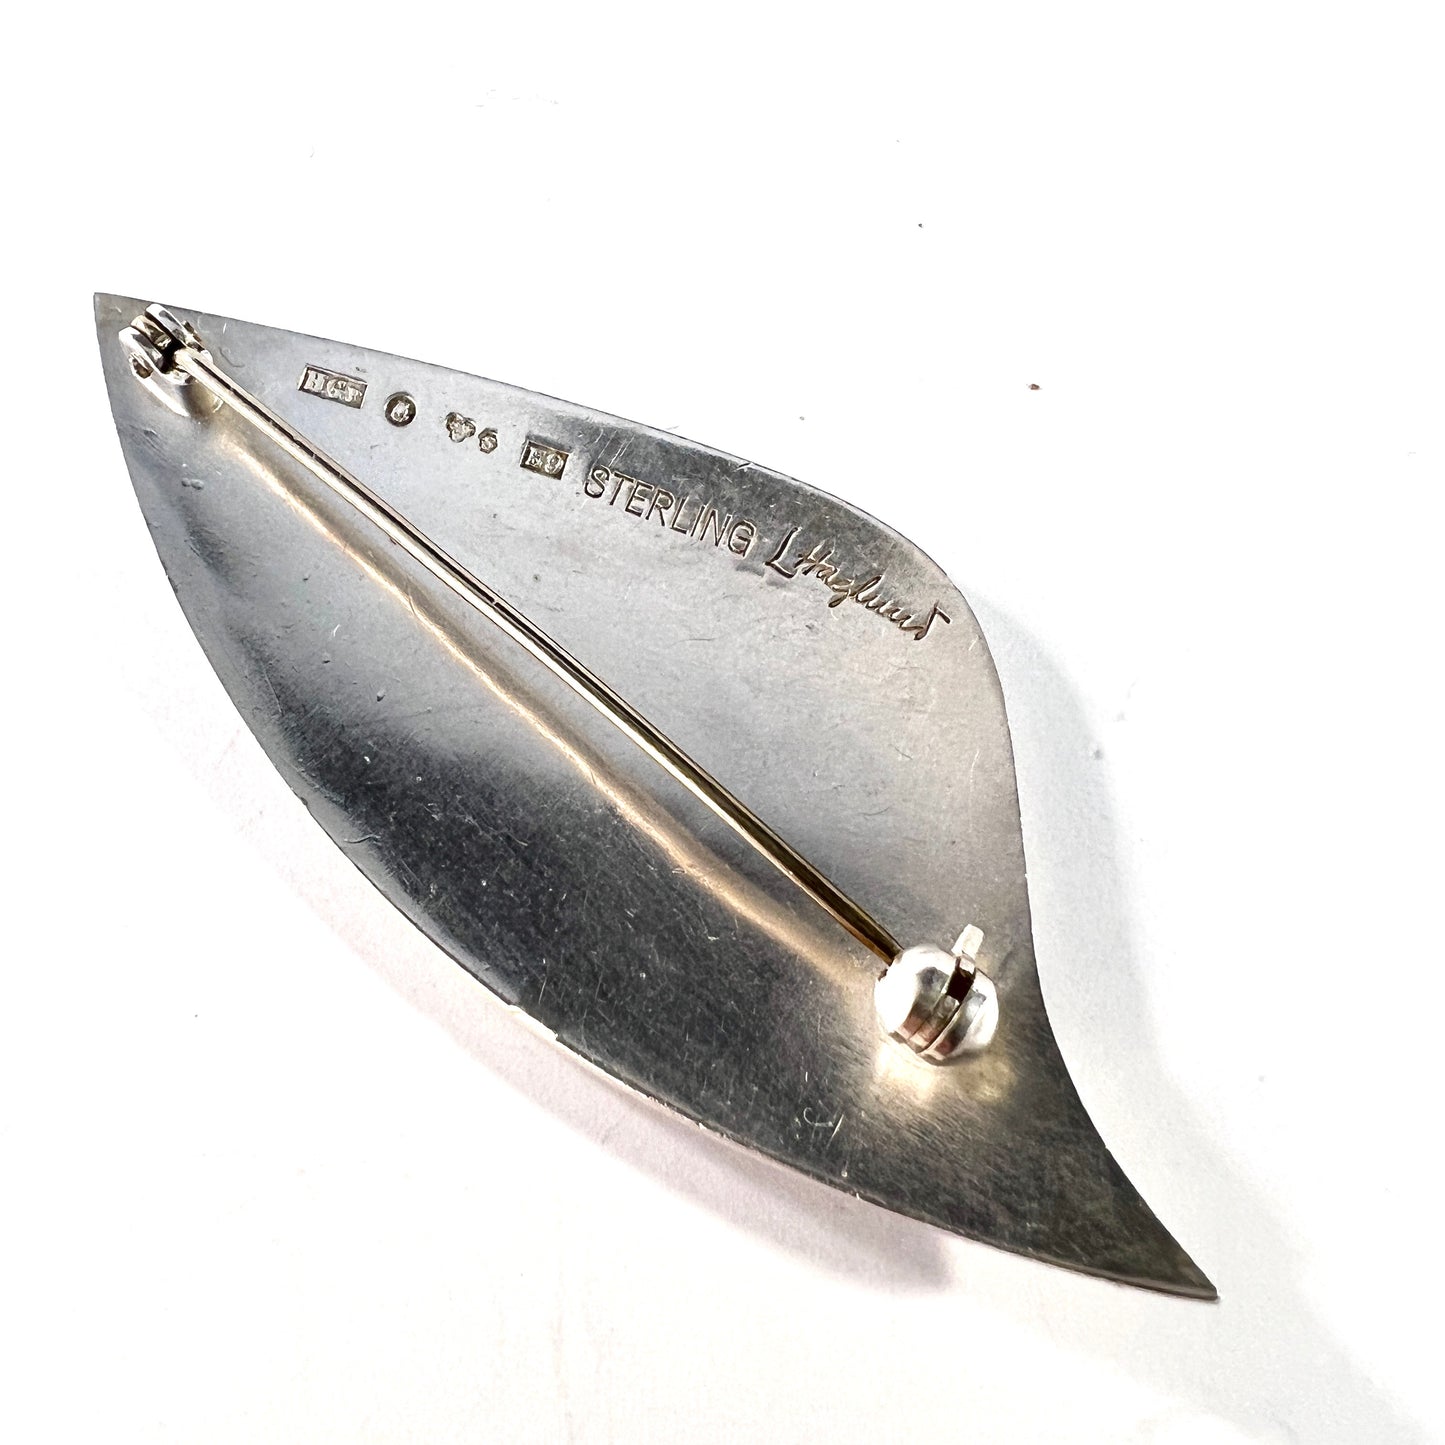 L Haglund for Hedbergs, Sweden 1955. Mid Century Modern Sterling Silver Brooch. Signed.